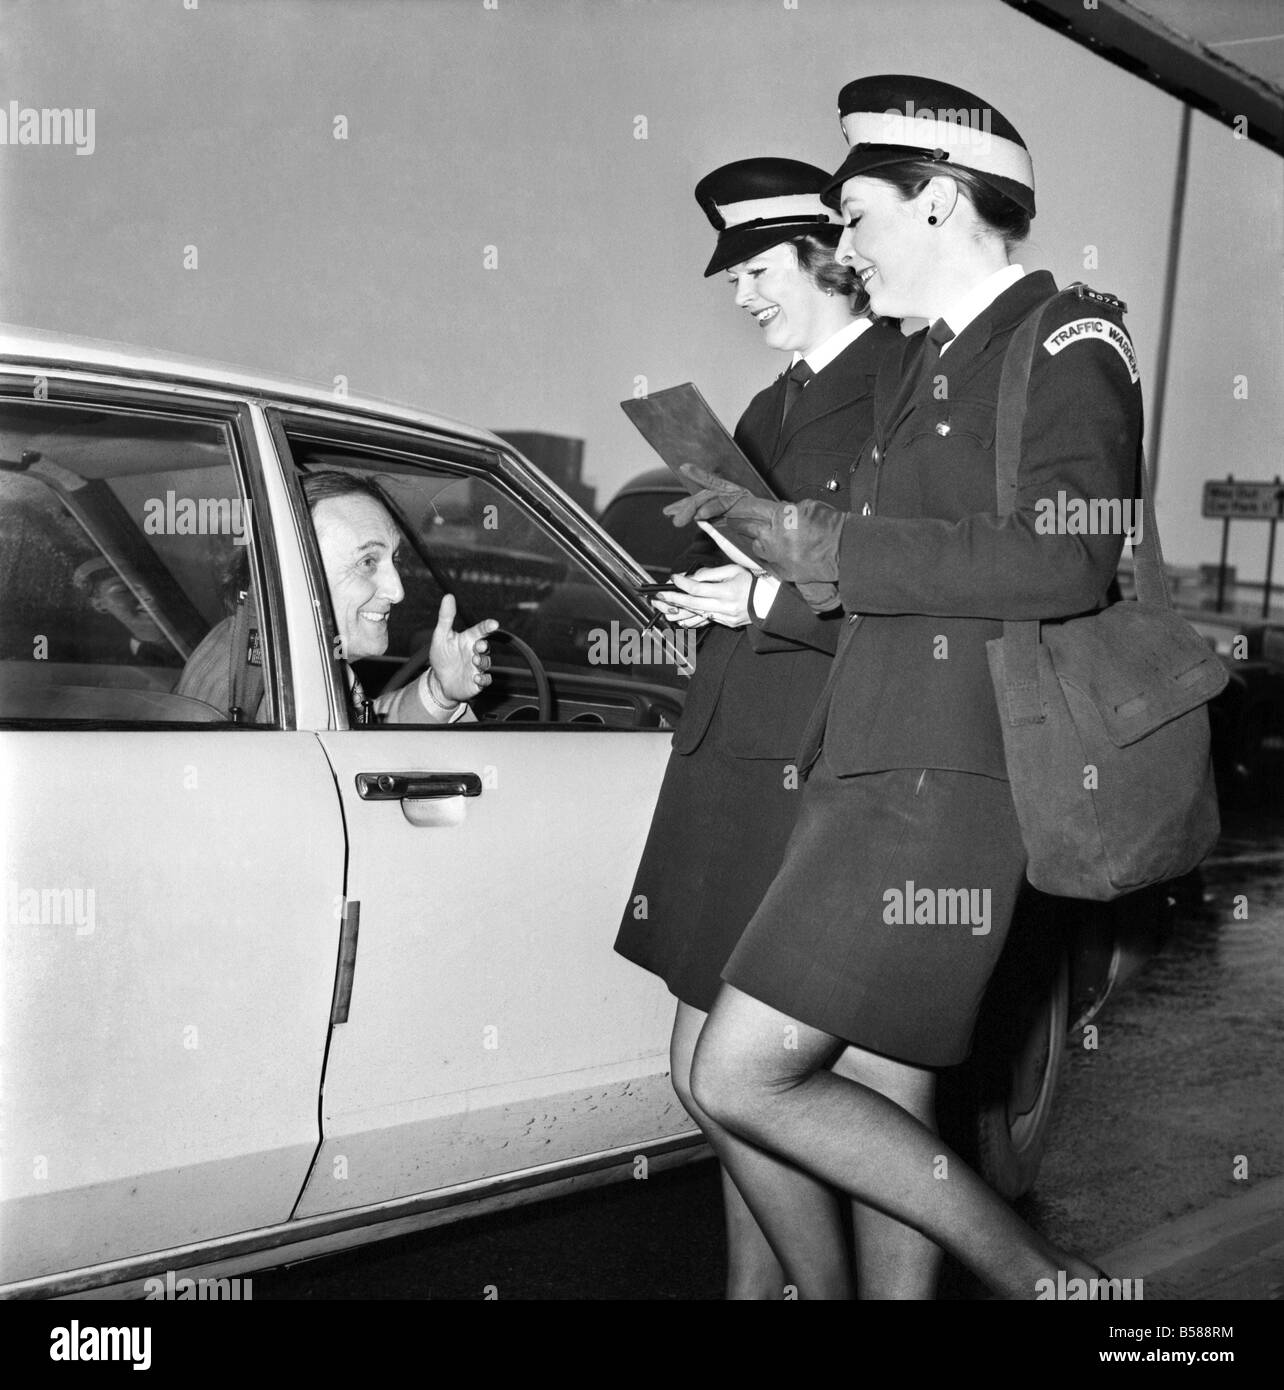 Beauty Queen Traffic Wardens. Travellers St London's Heathrow Airport may have their parking problems eased with cover girl smiles from two ex-model Traffic Wardens. Miss Denise Humphreys and Mrs. Linda Morton, Former beauty queens and models, have been stationed at the Airport since last Autumn. January 1975 75-00661-005 Stock Photo